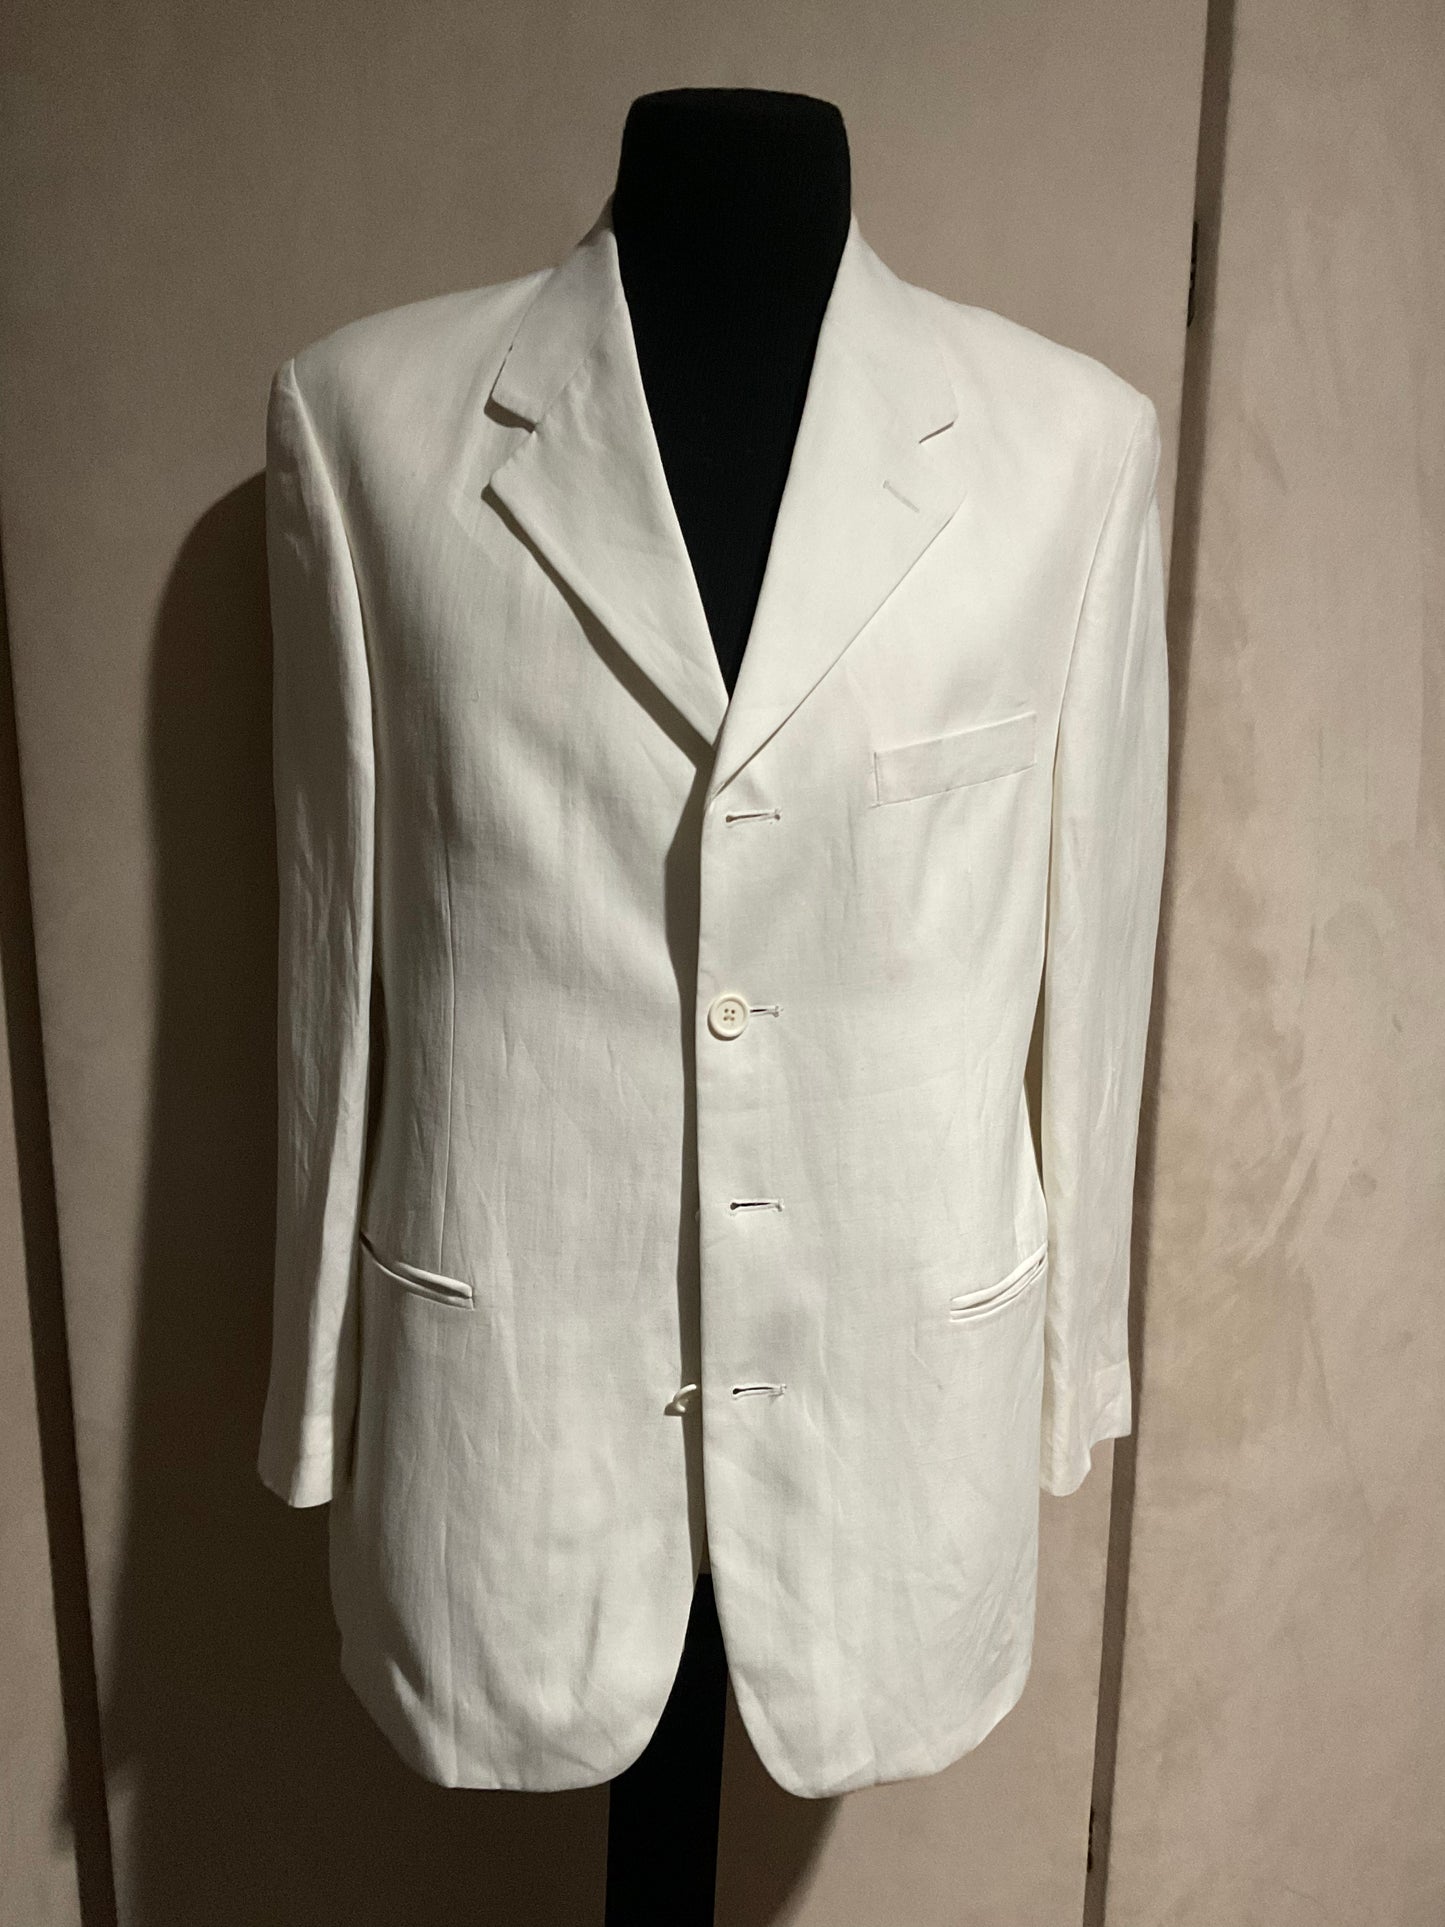 R P SUIT / WHITE LINEN / 40 REG / 4 BUTTON / NEW / MADE IN CANADA